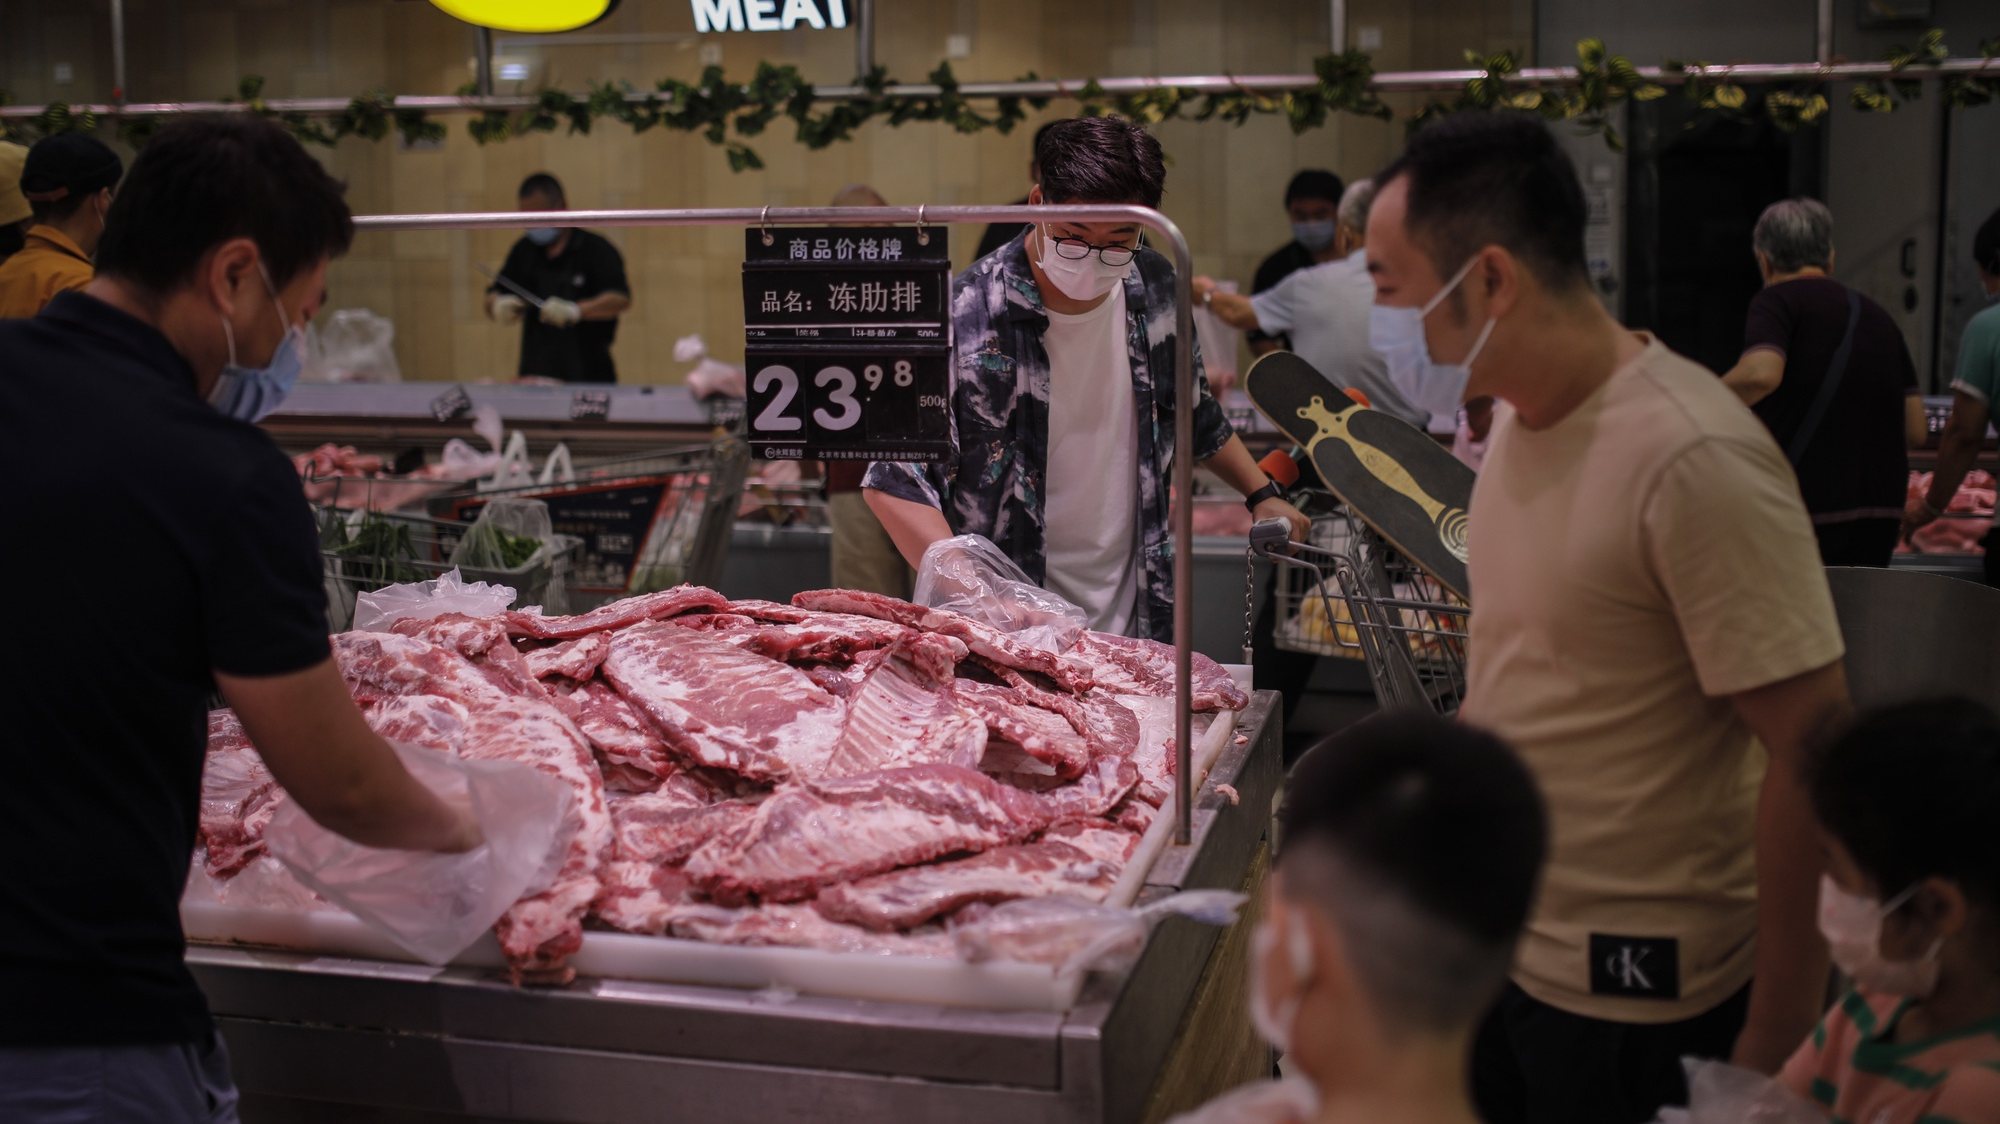 epa08507965 People wearing protective face masks select pork chops in a supermarket on the Chinese traditional holiday of Dragon Boat Festival, amid coronavirus pandemic in Beijing, China, 25 June 2020.  EPA/WU HONG